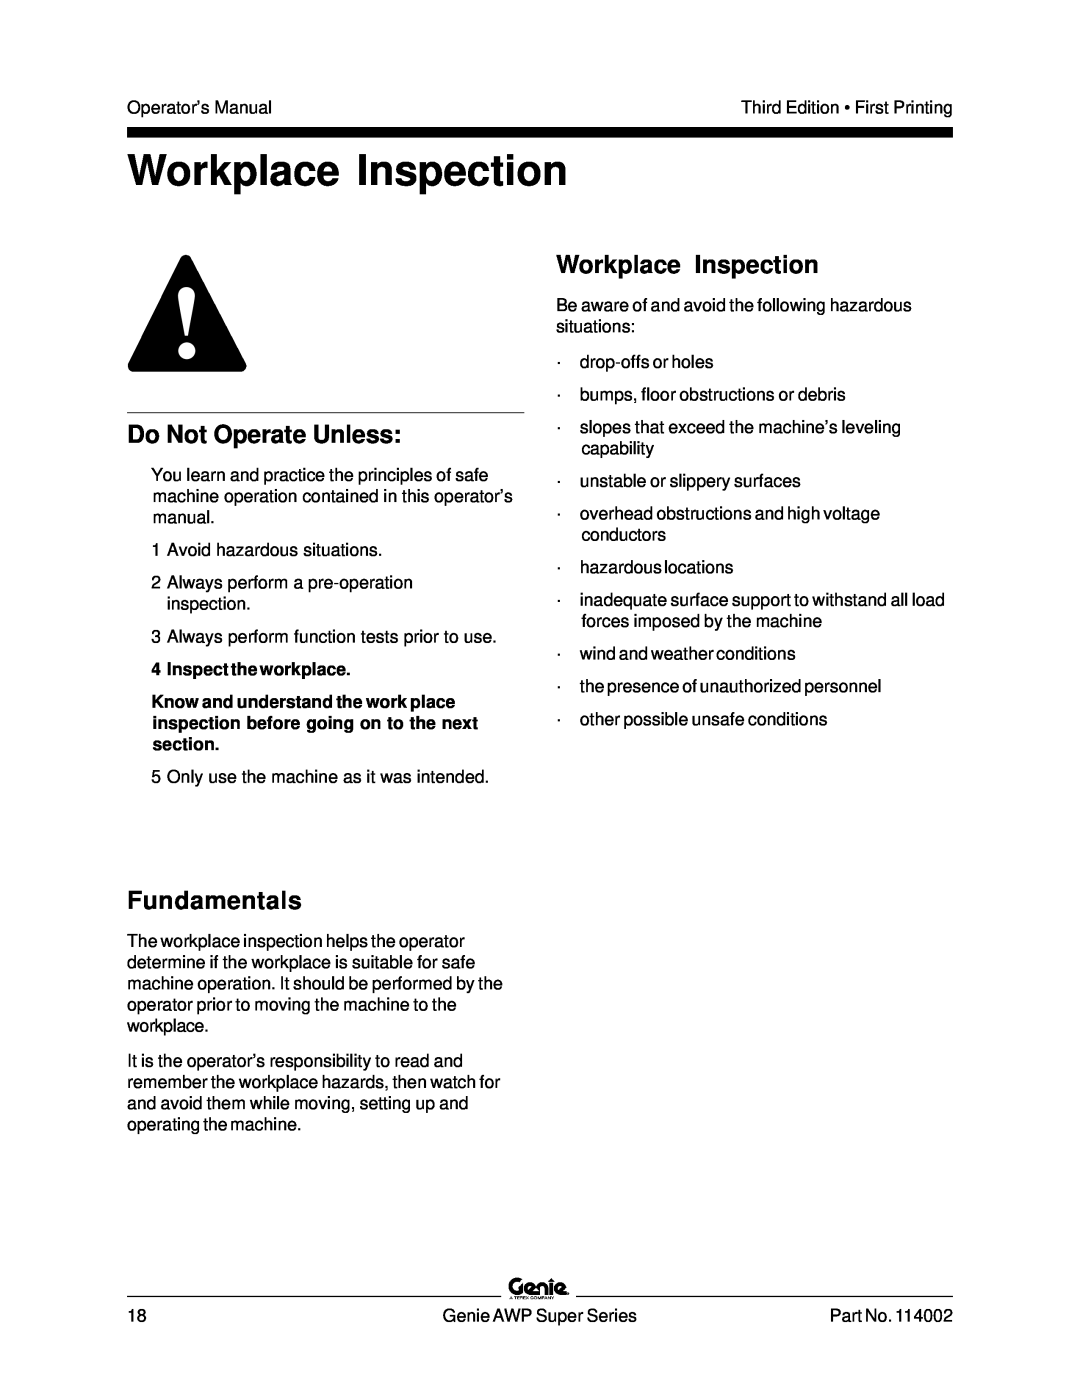 Genie 114002 manual Workplace Inspection, Inspect the workplace, Do Not Operate Unless, Fundamentals 